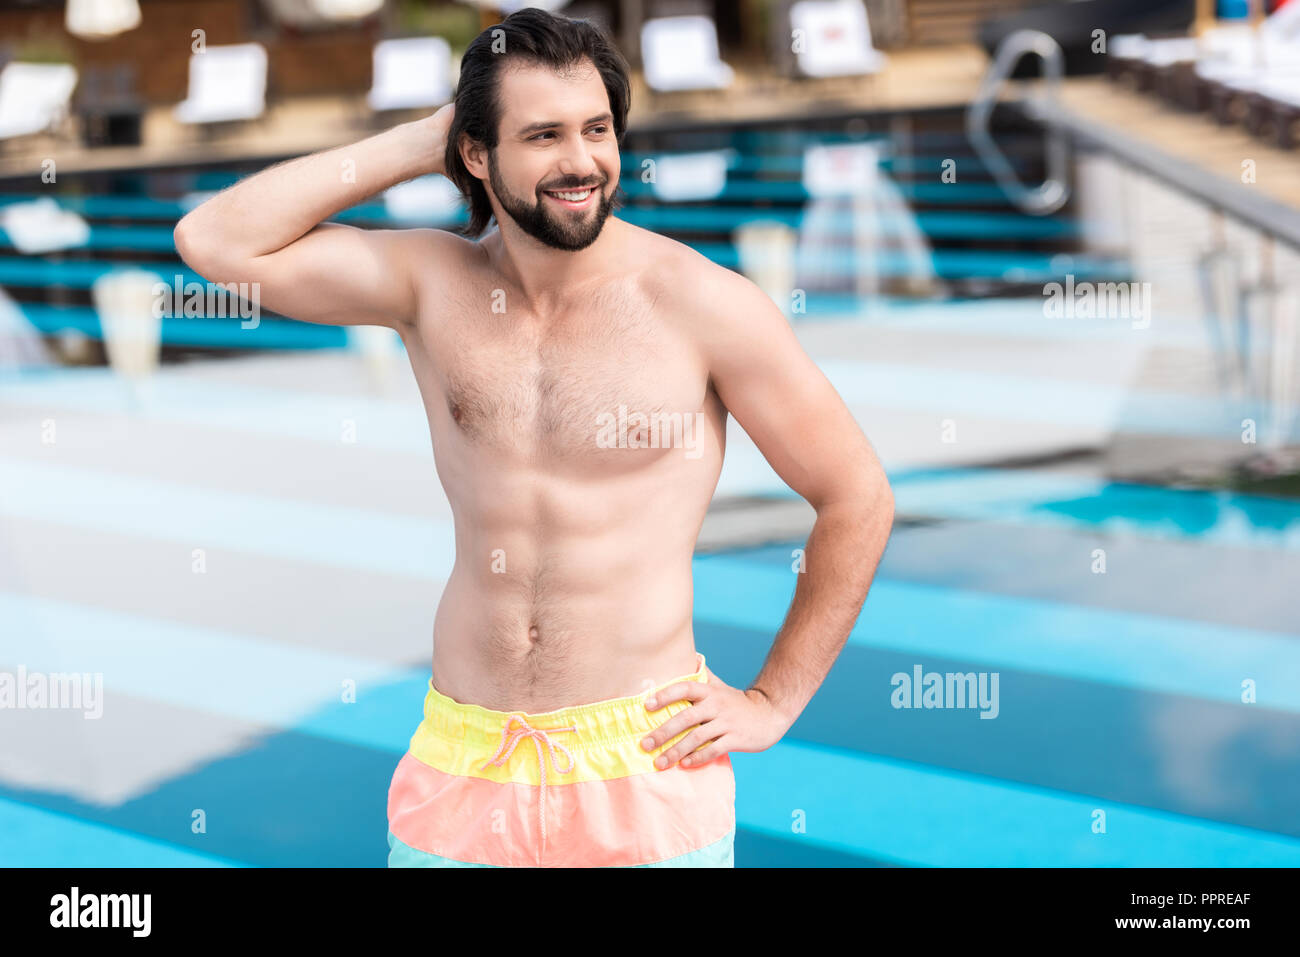 Boy swimmer with smile on bearded face in swimming pool Stock Photo by  ©Tverdohlib.com 161922302